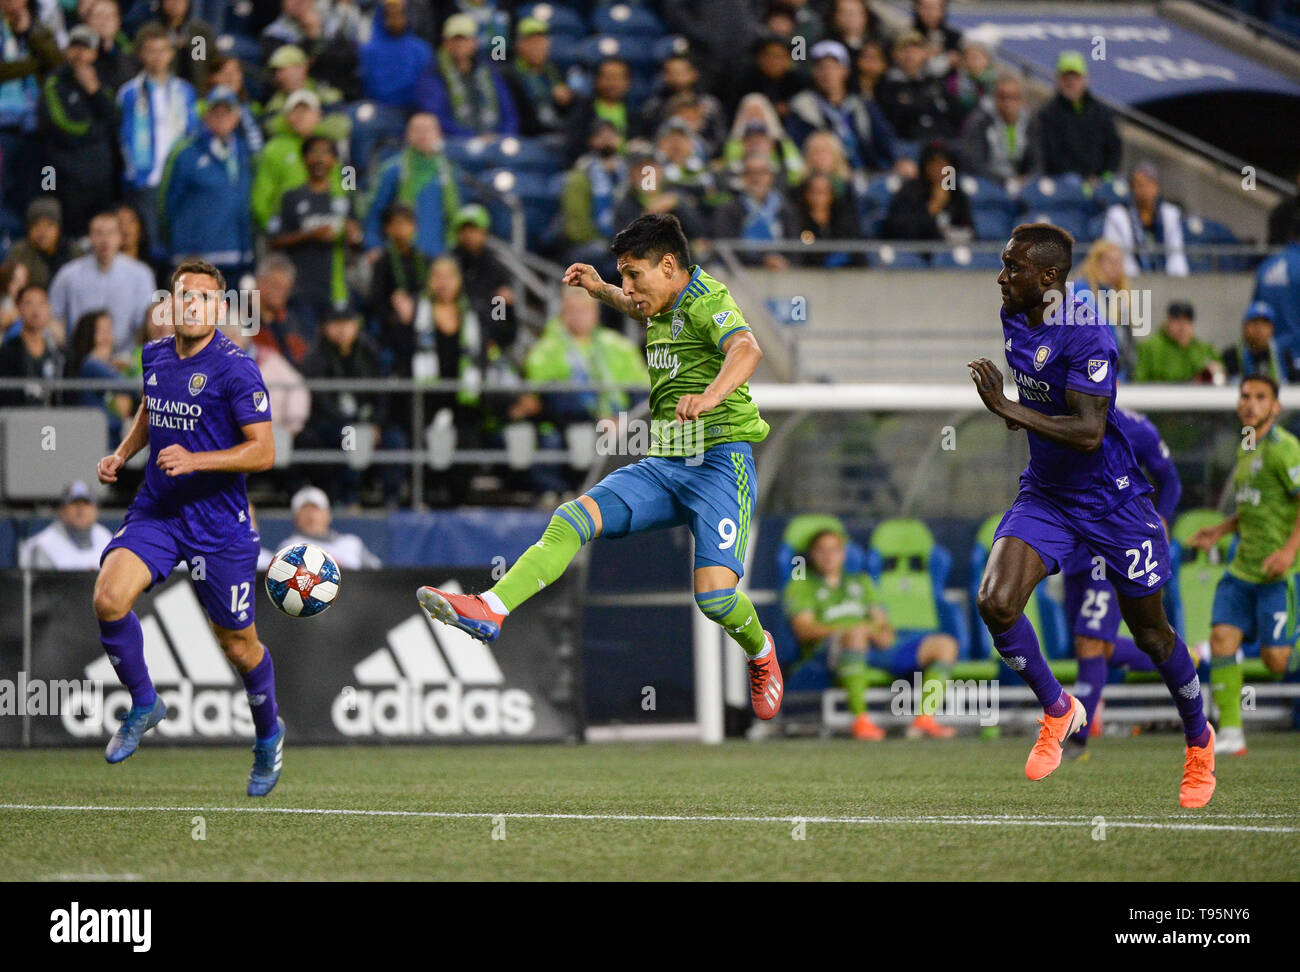 Seattle, Washington, USA. 15th May, 2019. Seattle forward Raul Ruidiaz (9) tries to gain contol of the ball between two Orlando defenders as Orlando City visits the Seattle Sounders for an MLS match at Century Link Field in Seattle, WA. Seattle won the match 2-1. Credit: Jeff Halstead/ZUMA Wire/Alamy Live News Stock Photo